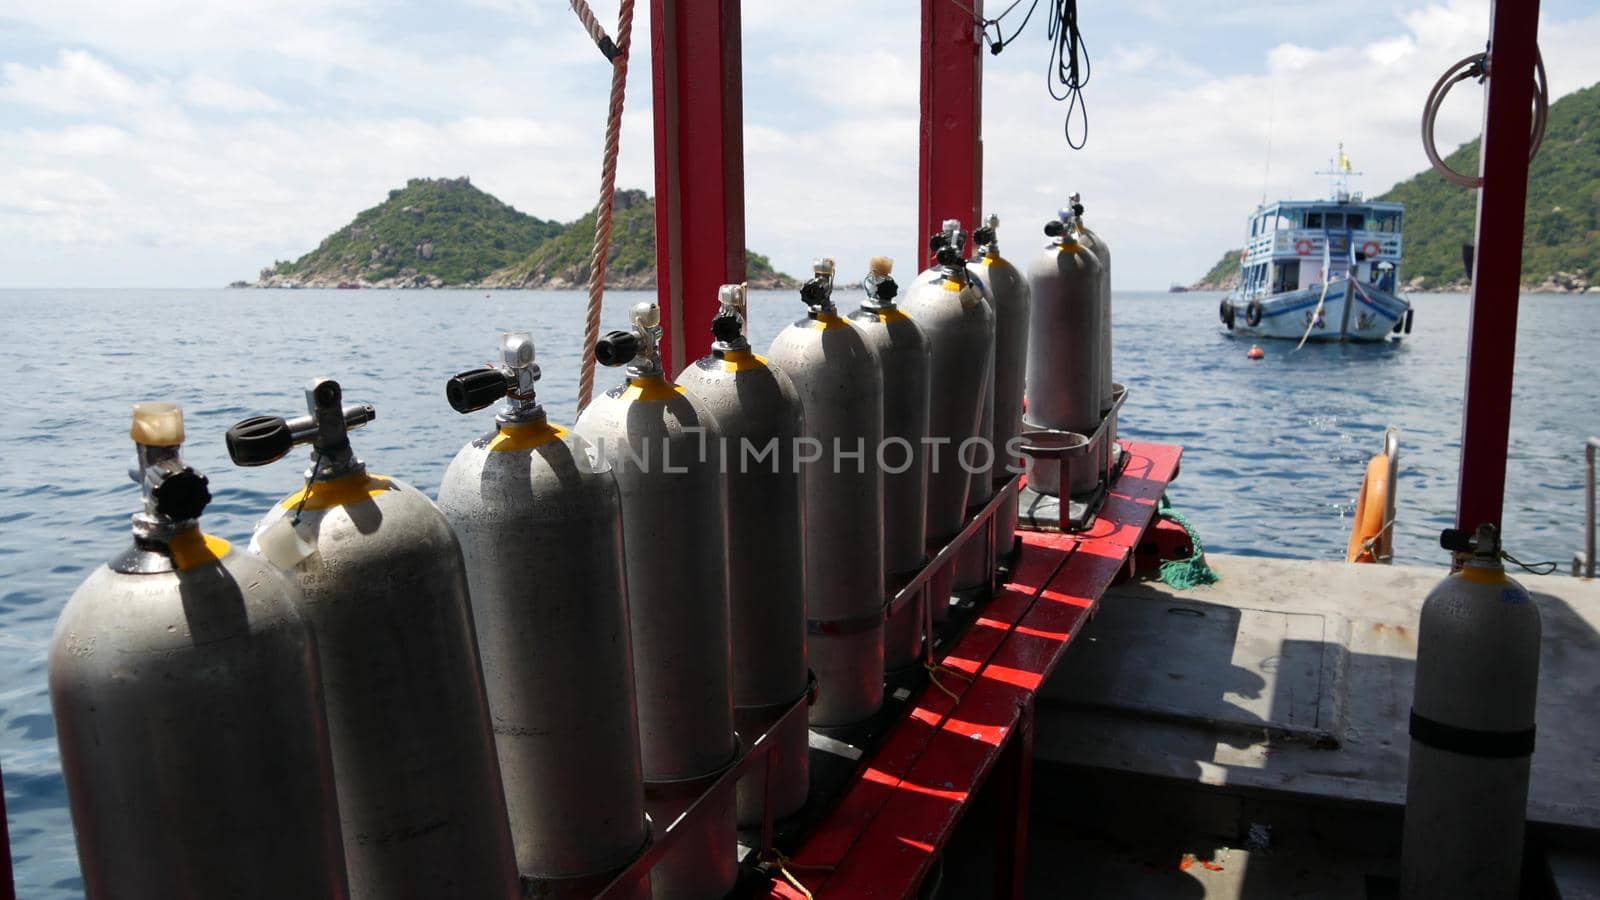 Row of oxygen tanks and diving equipment placed on modern boat in rippling ocean near Koh Tao resort, Thailand. Concept of tourist sports extreme entertainment, adventure and new experience. by DogoraSun